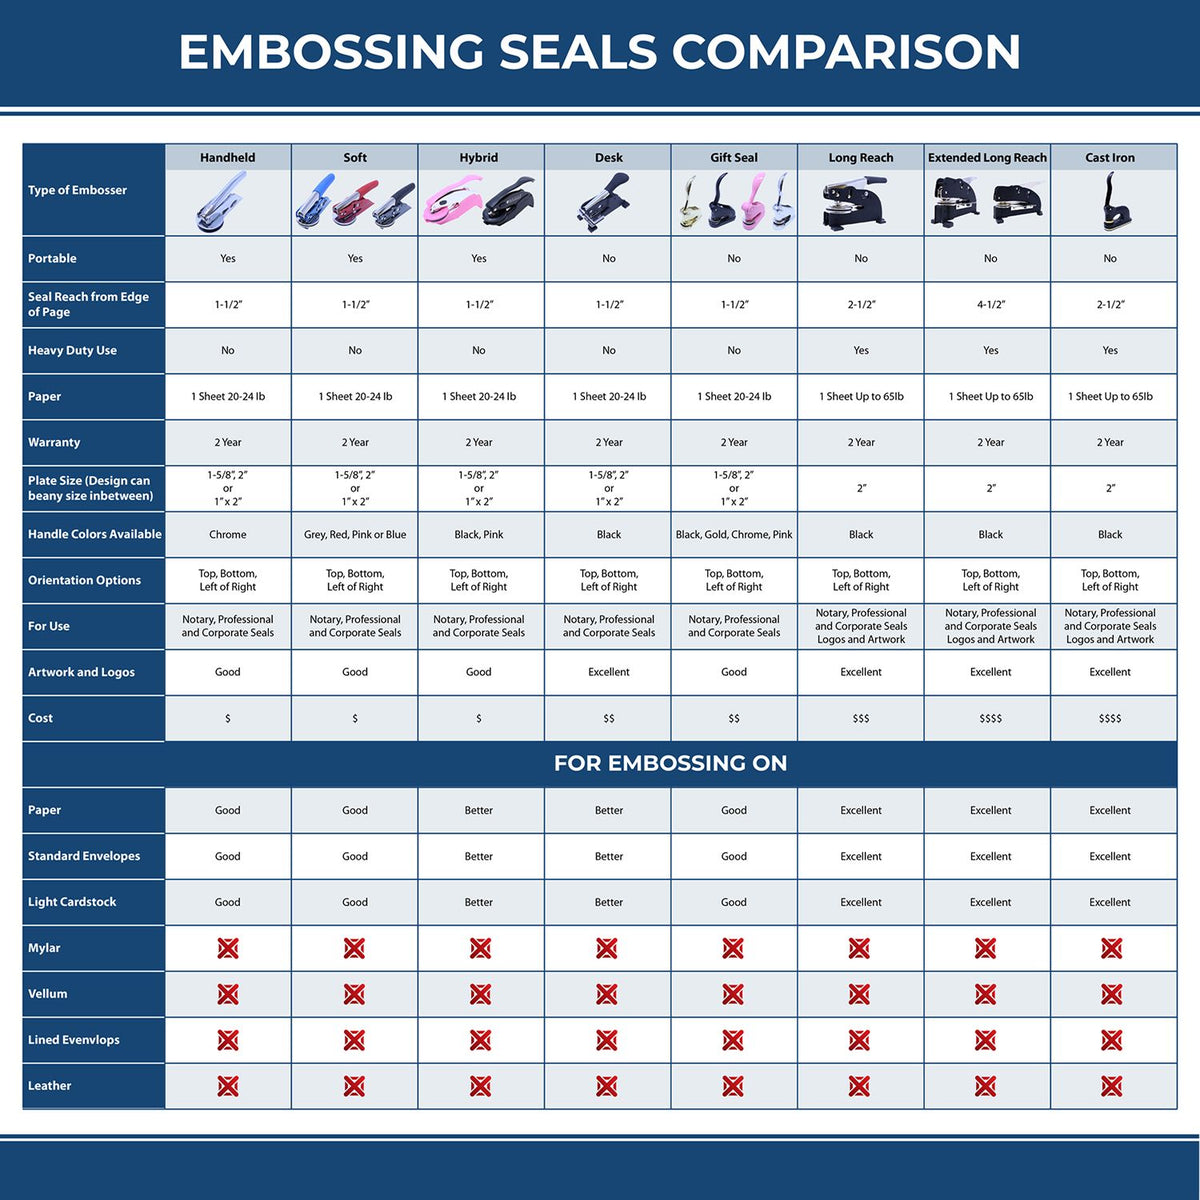 A comparison chart for the different types of mount models available for the Hybrid Massachusetts Geologist Seal